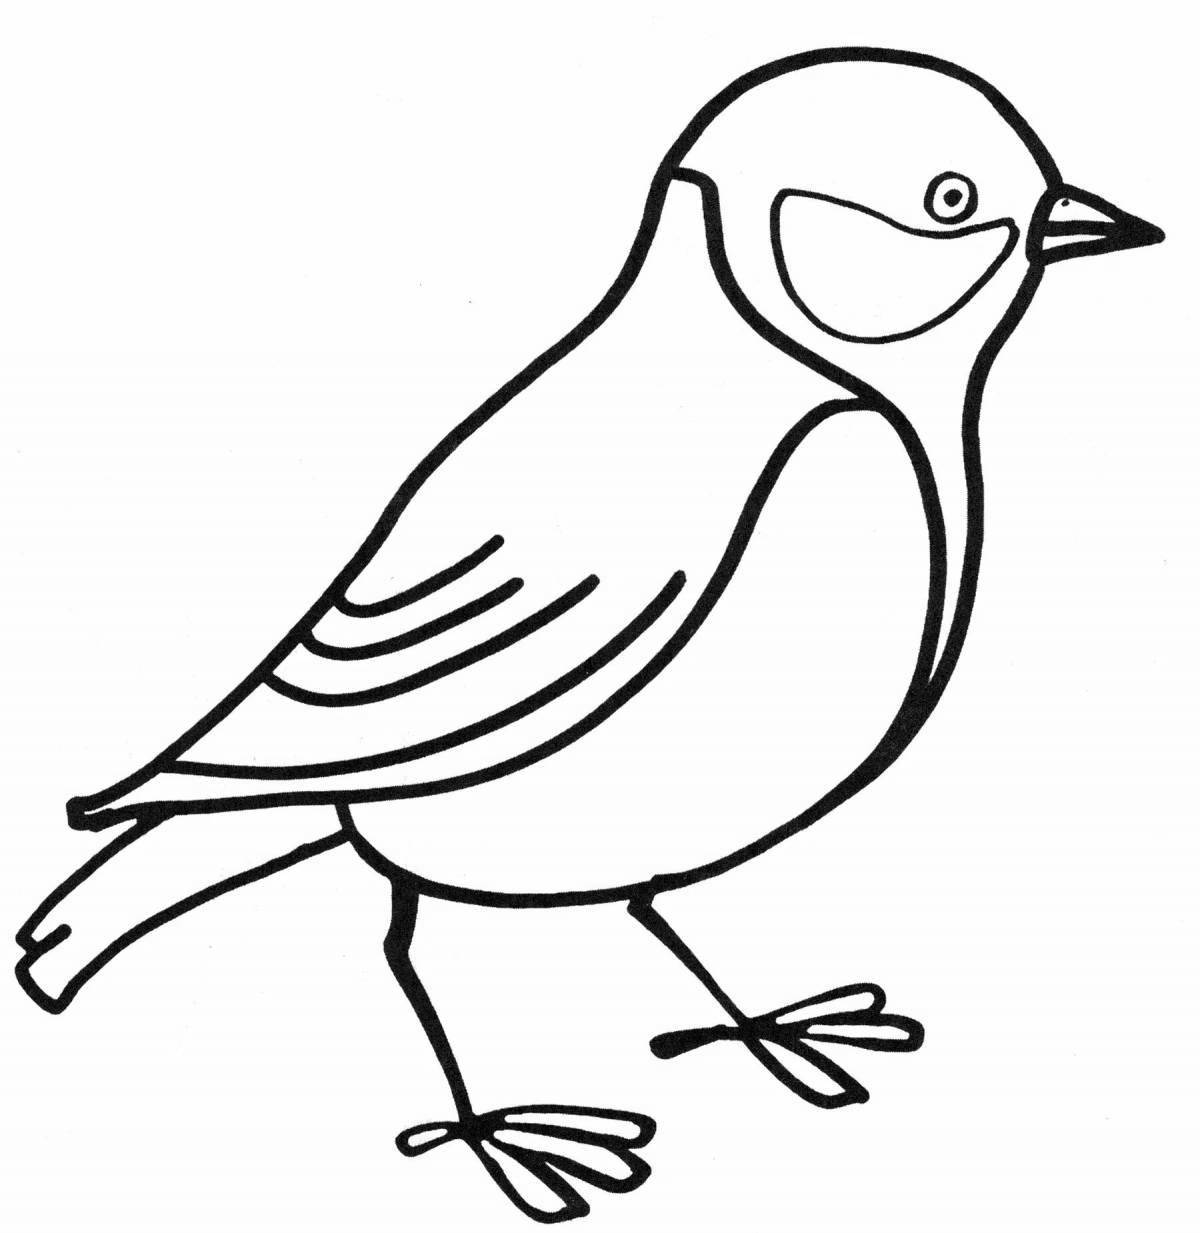 Intriguing titmouse coloring page